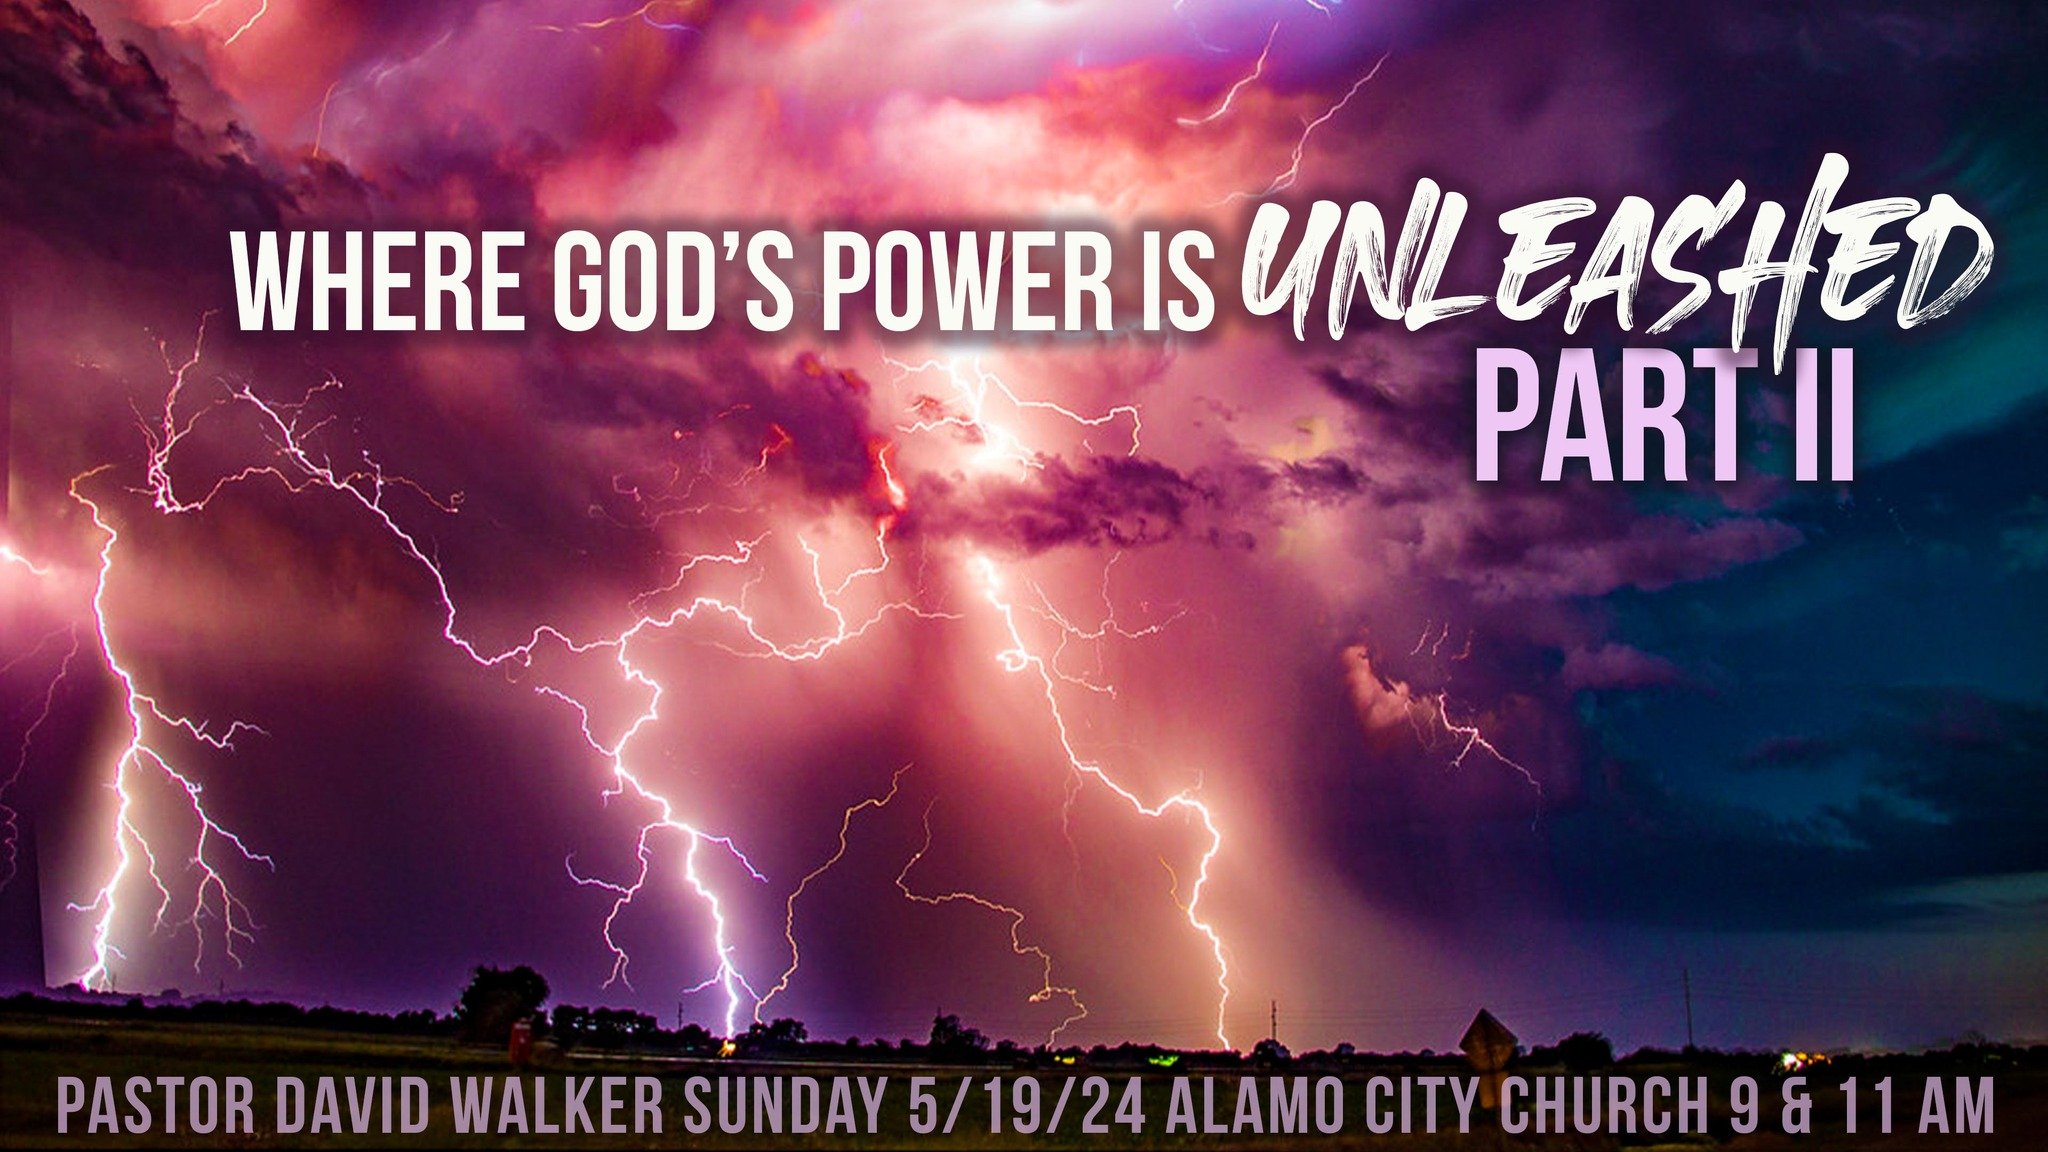 Join us TOMORROW at Alamo City!
We are thrilled to have Jillian Warman back with us to lead us into GOD'S presence tomorrow with our worship team.
Pastor Walker will share a powerful message-&quot;Where God's Power Is Unleashed- Part 2&quot;
We have 